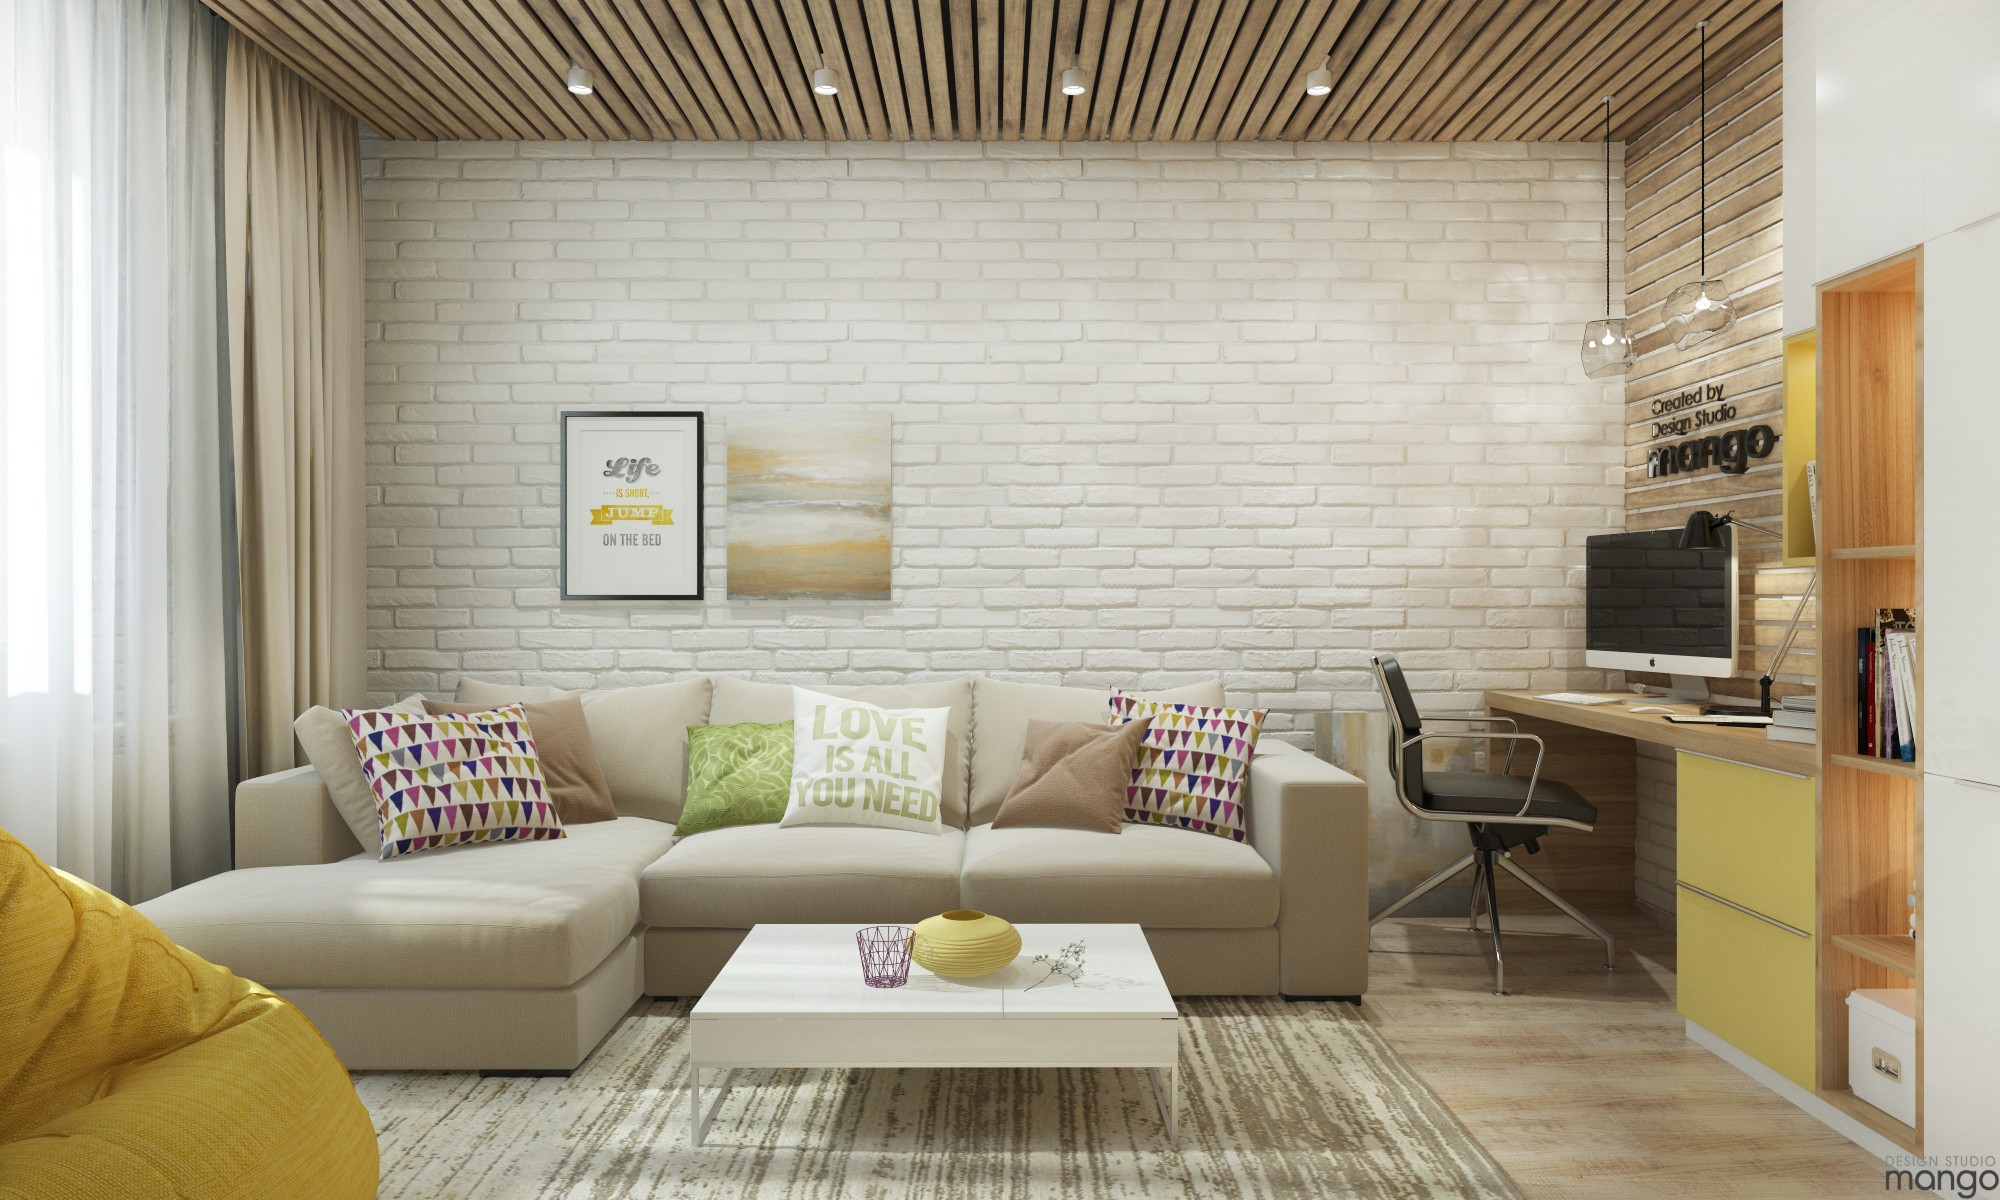 Wall structure small living room design "width =" 2000 "height =" 1200 "srcset =" https://mileray.com/wp-content/uploads/2020/05/1588516444_363_Inspiration-To-Arrange-Small-Living-Room-Designs-Which-Combine-Looks.jpg 2000w, https: // myfashionos .com / wp-content / uploads / 2016/09 / Design-Studio-Mango9-300x180.jpg 300w, https://mileray.com/wp-content/uploads/2016/09/Design-Studio-Mango9- 768x461. jpg 768w, https://mileray.com/wp-content/uploads/2016/09/Design-Studio-Mango9-1024x614.jpg 1024w, https://mileray.com/wp-content/uploads/2016/ 09 / Design-Studio-Mango9-696x418.jpg 696w, https://mileray.com/wp-content/uploads/2016/09/Design-Studio-Mango9-1068x641.jpg 1068w, https://mileray.com/ wp- content / uploads / 2016/09 / Design-Studio-Mango9-700x420.jpg 700w "sizes =" (maximum width: 2000px) 100vw, 2000px